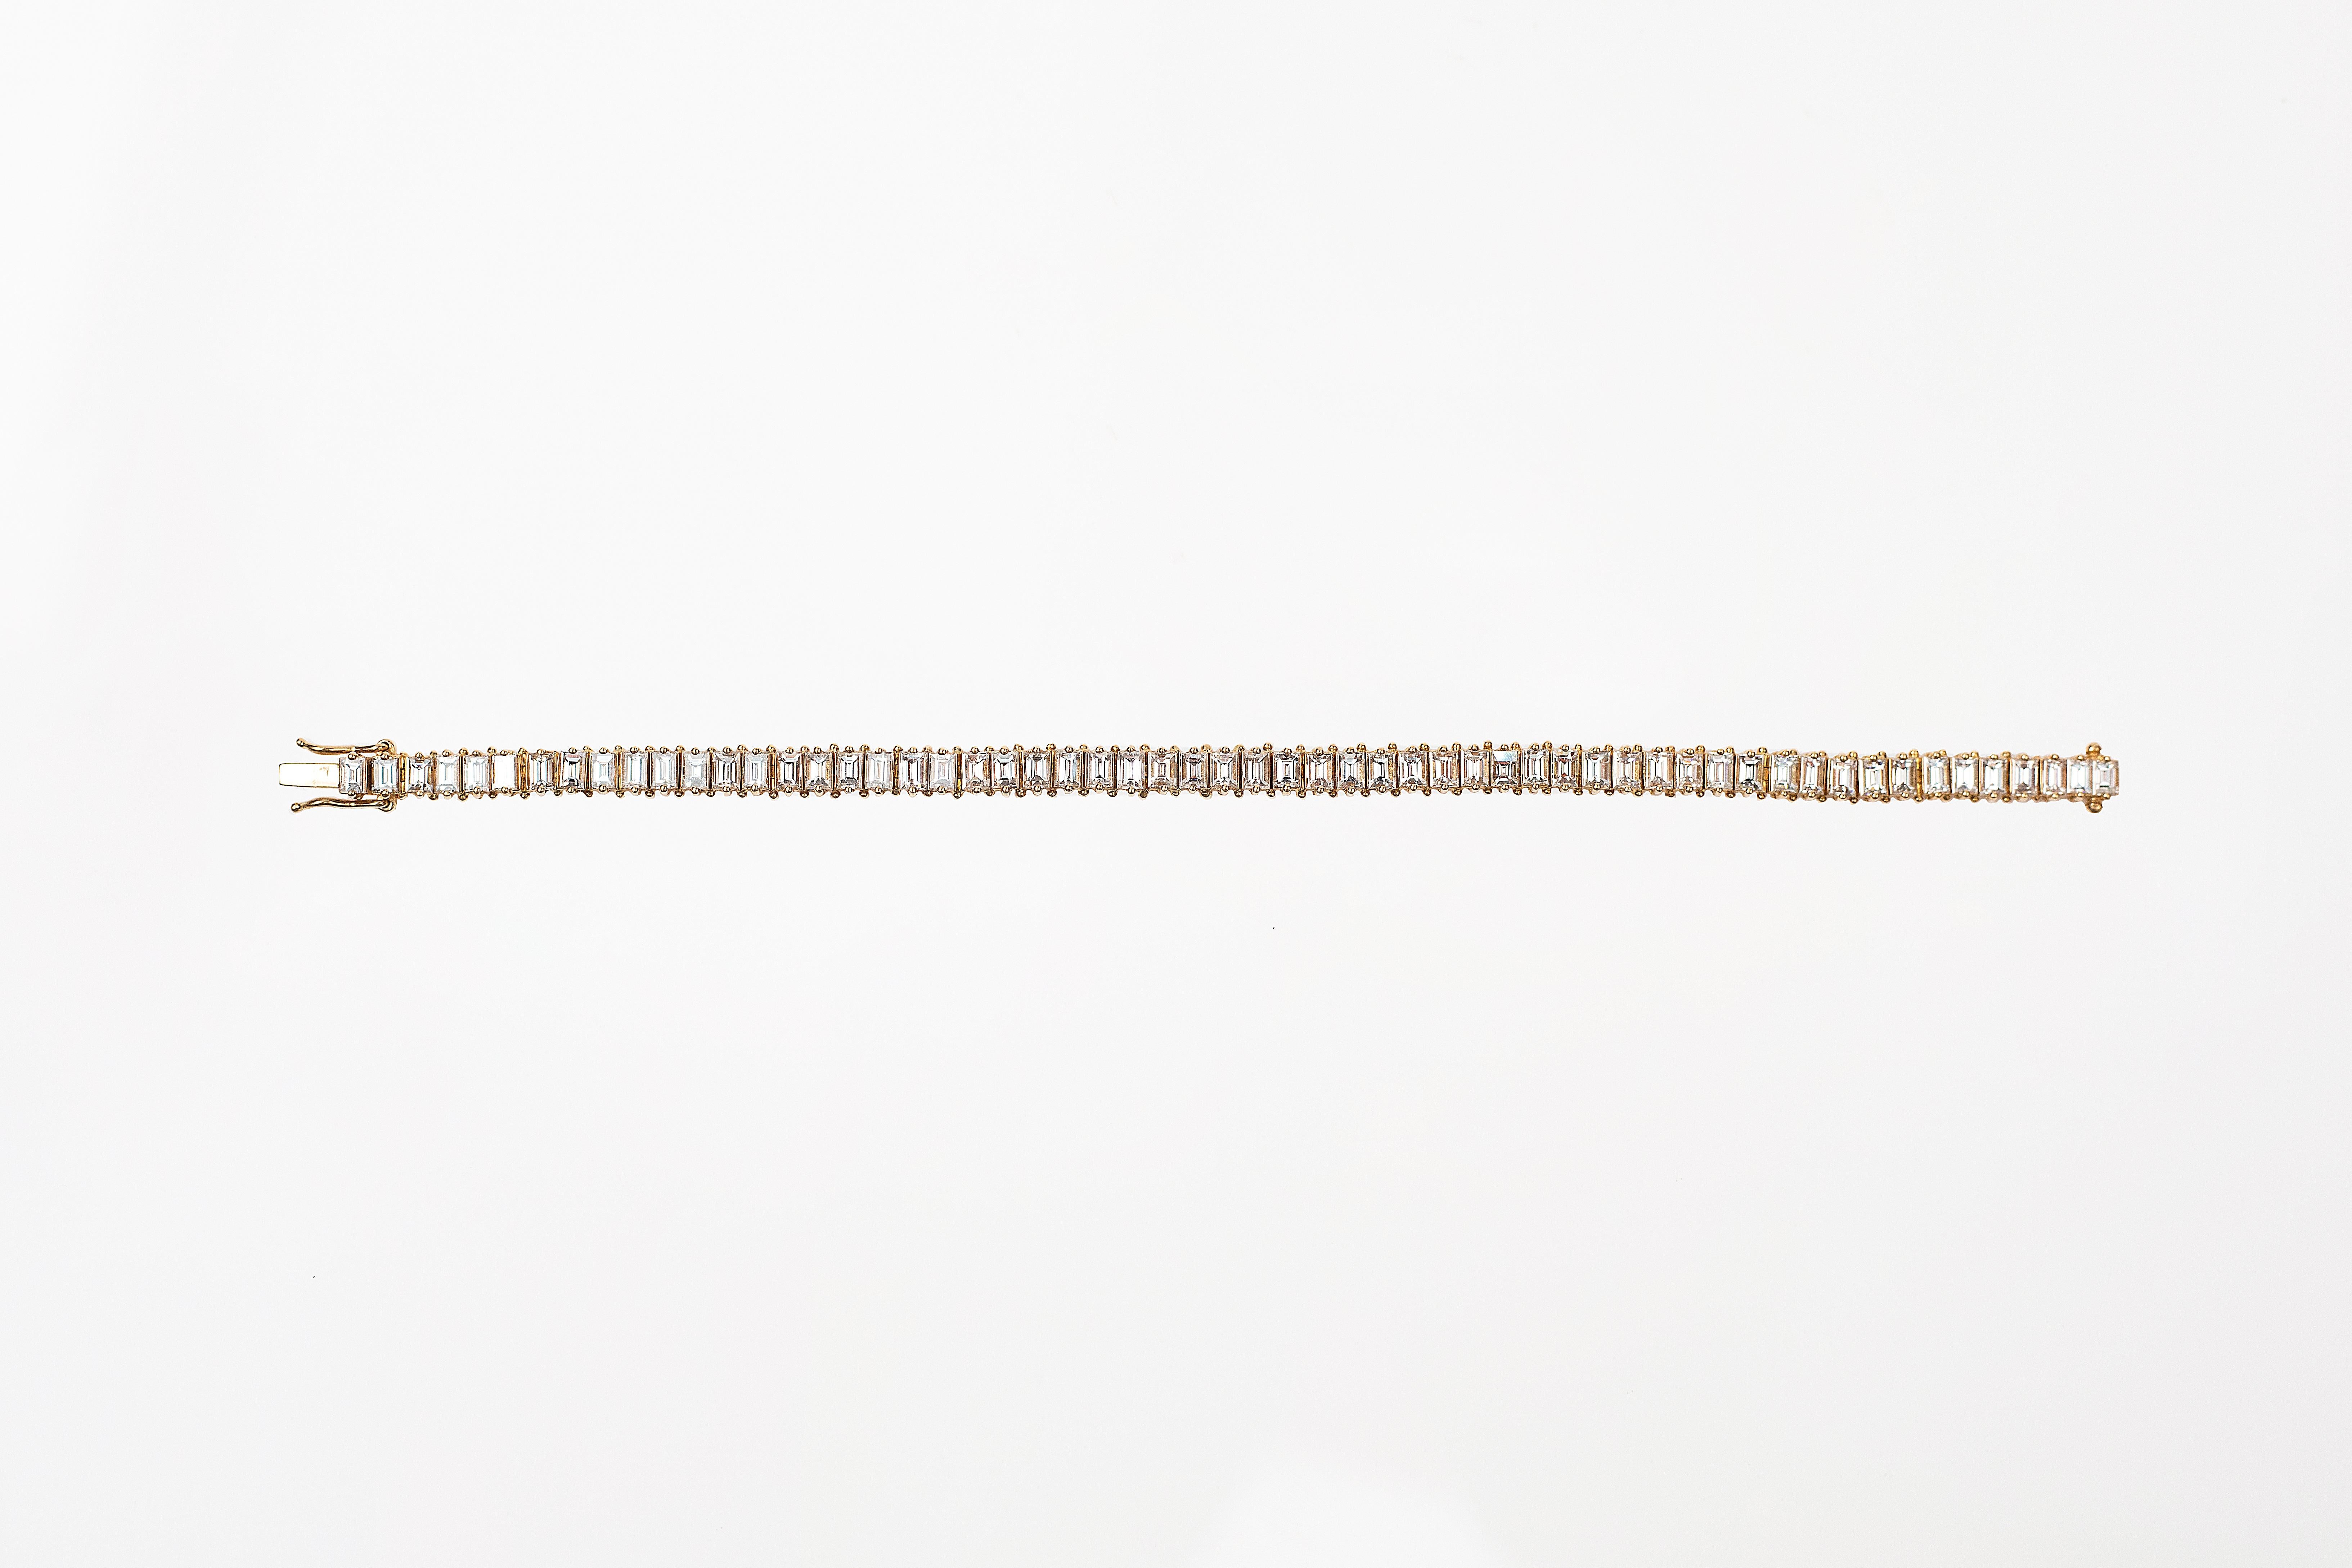 Handcrafted Tennis Bracelet in 18K Yellow Gold Studded with 0.15 Pointer Baguette Shape Diamond.
Gold Weight - 16.730 gms
Diamond Clarity - VS
Diamond Colour - G
